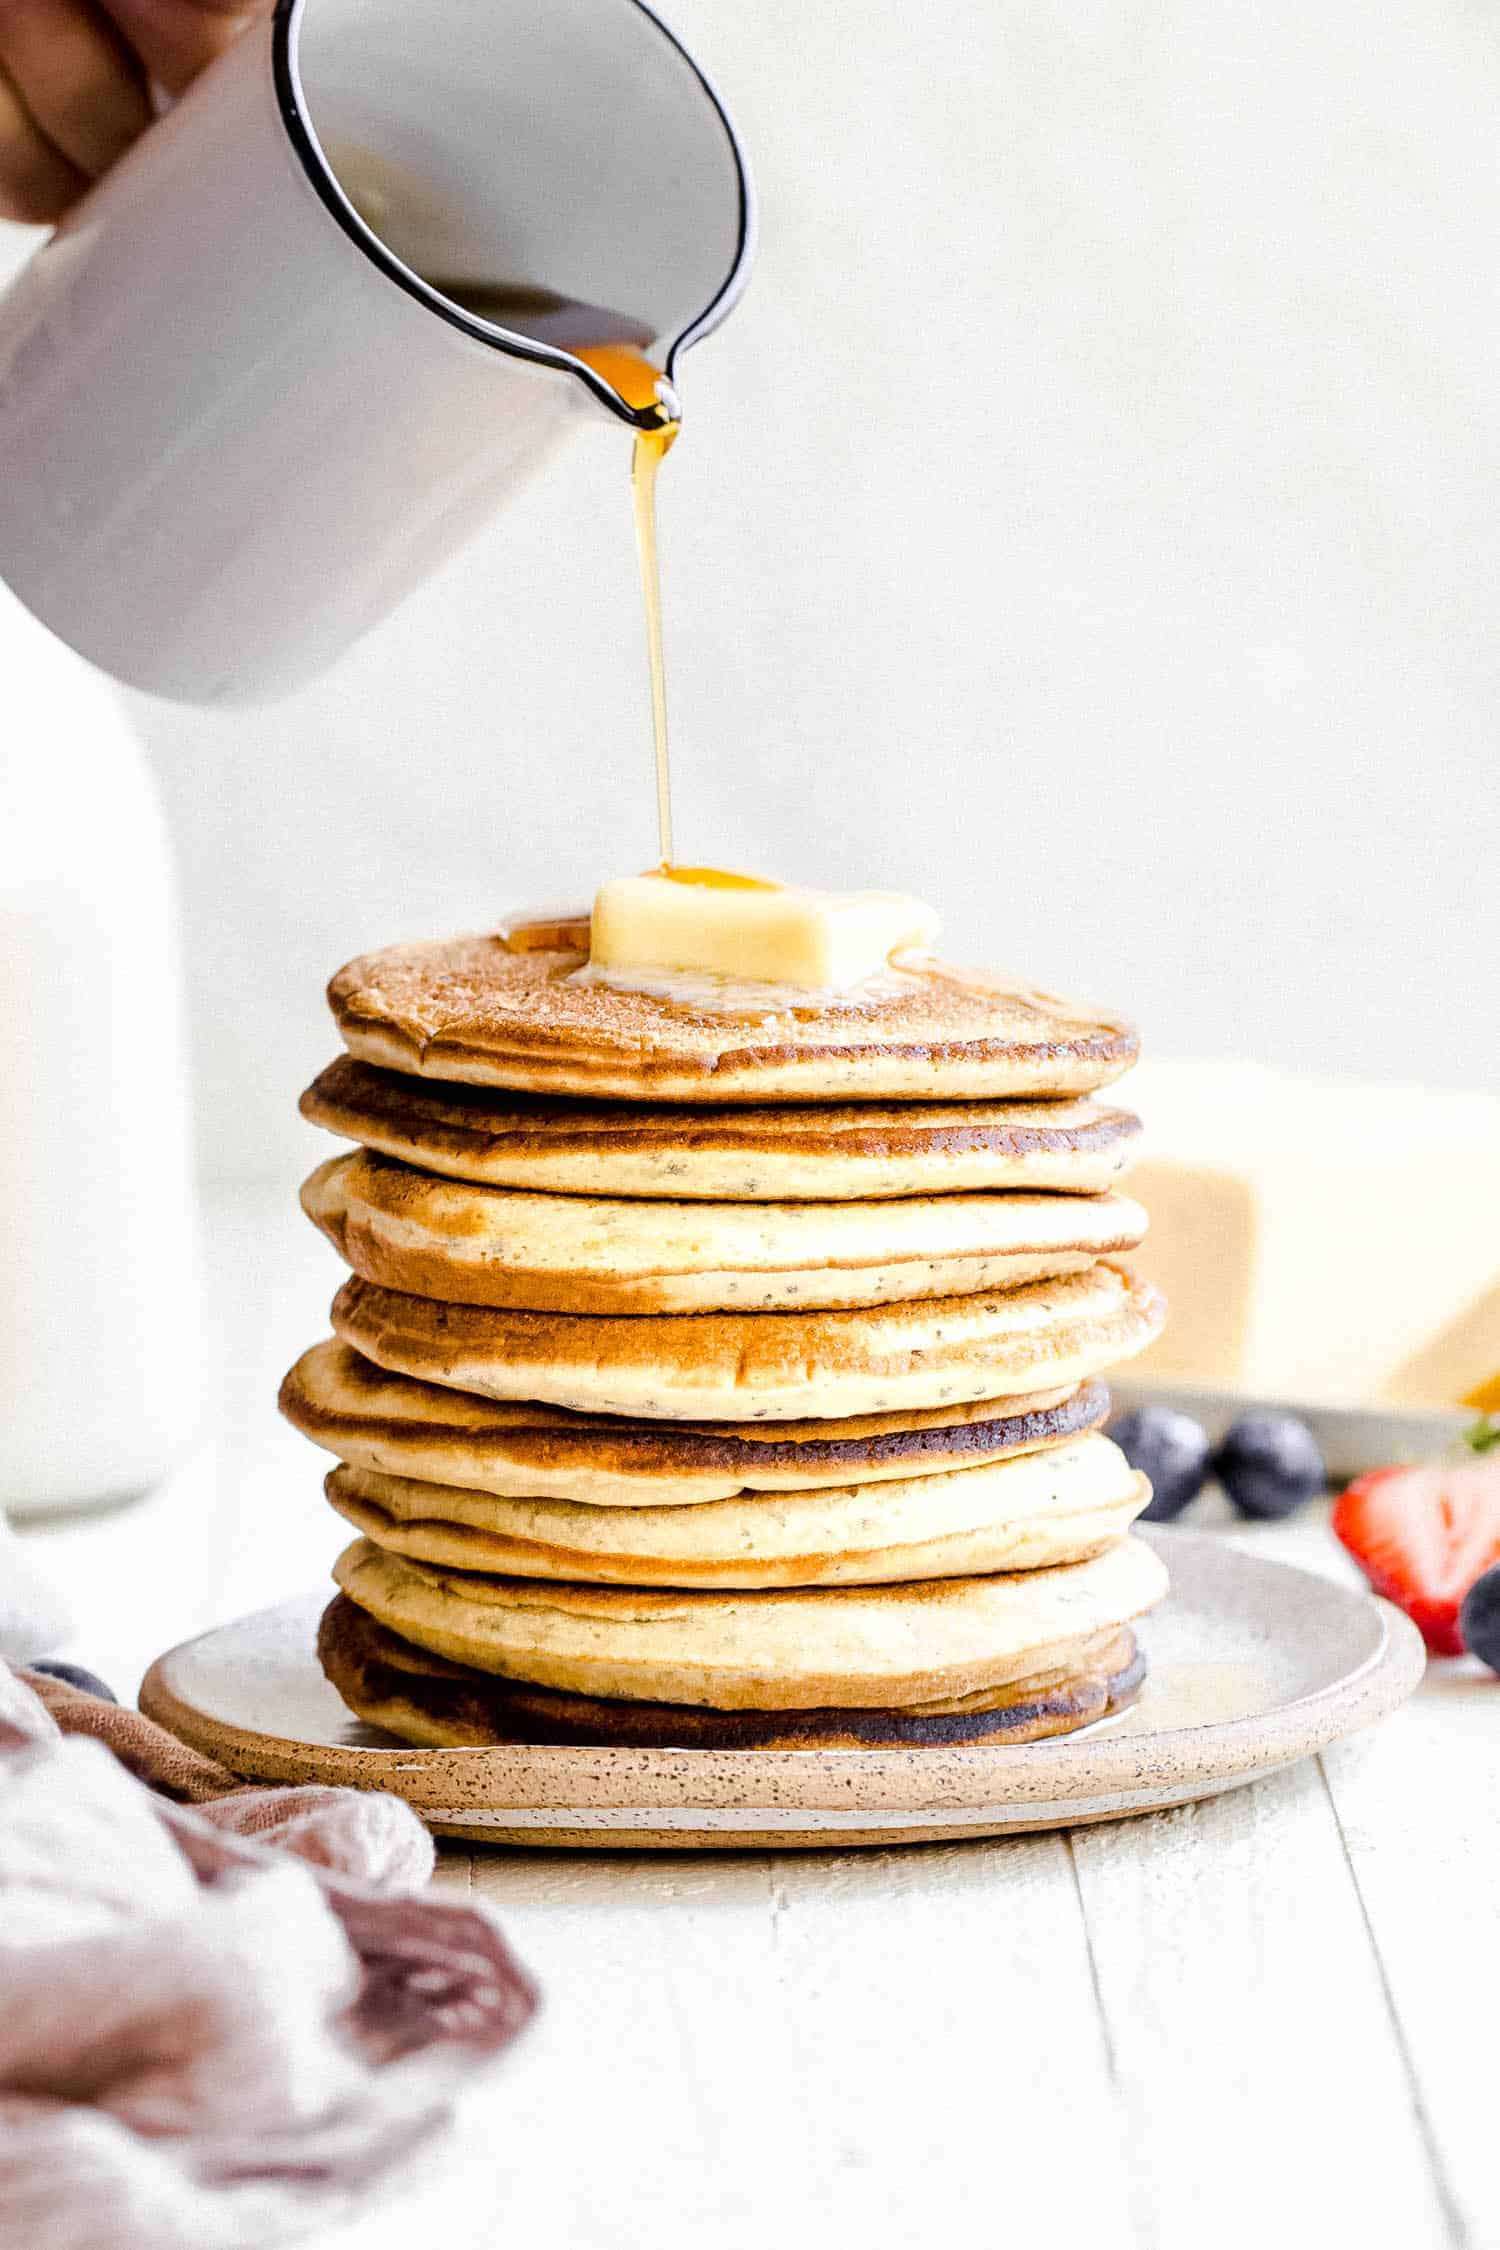 pouring maple syrup onto a stack of fluffy pancakes on a white plate